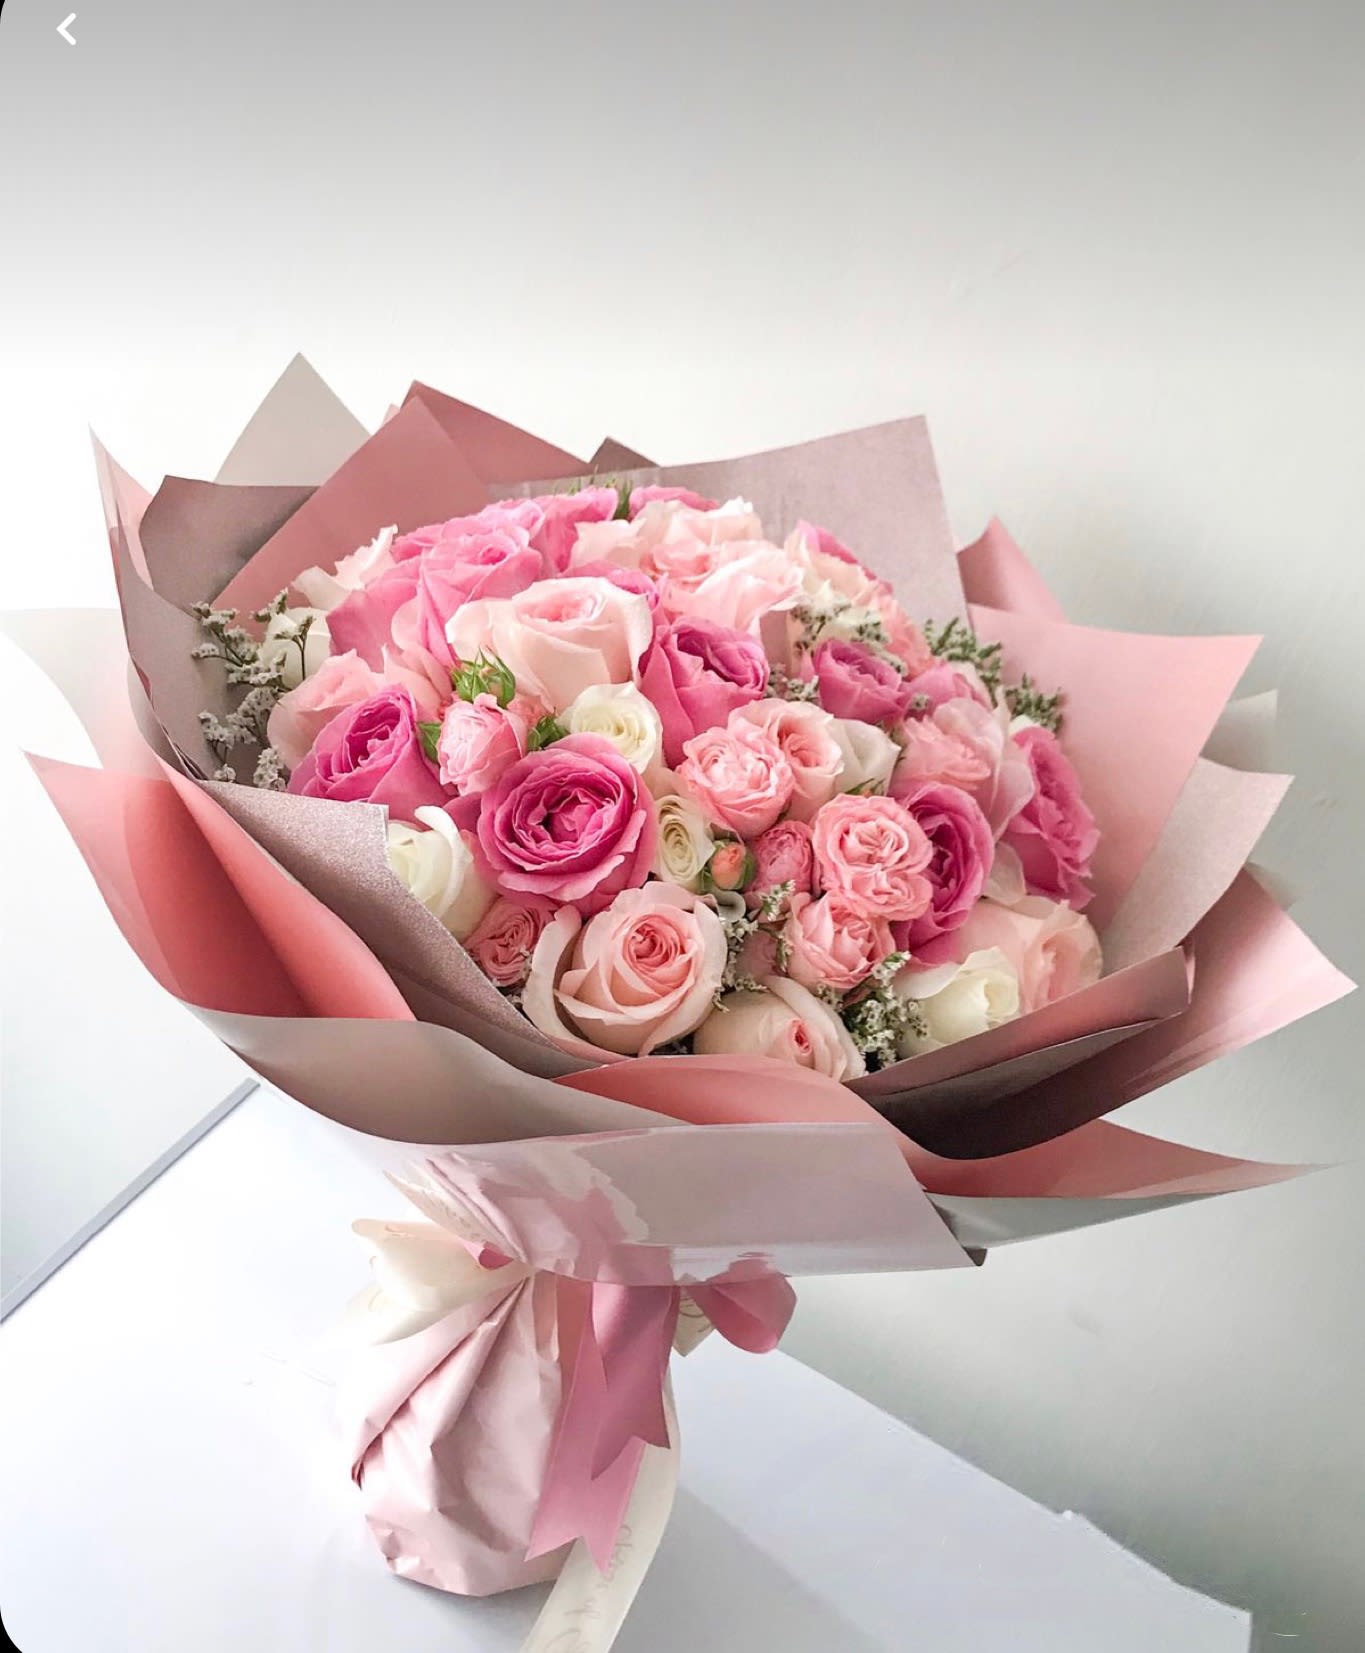 Lovely Pink Bouquet - A mix of different shades of pink roses and spray rose in a hand tied bouquet.